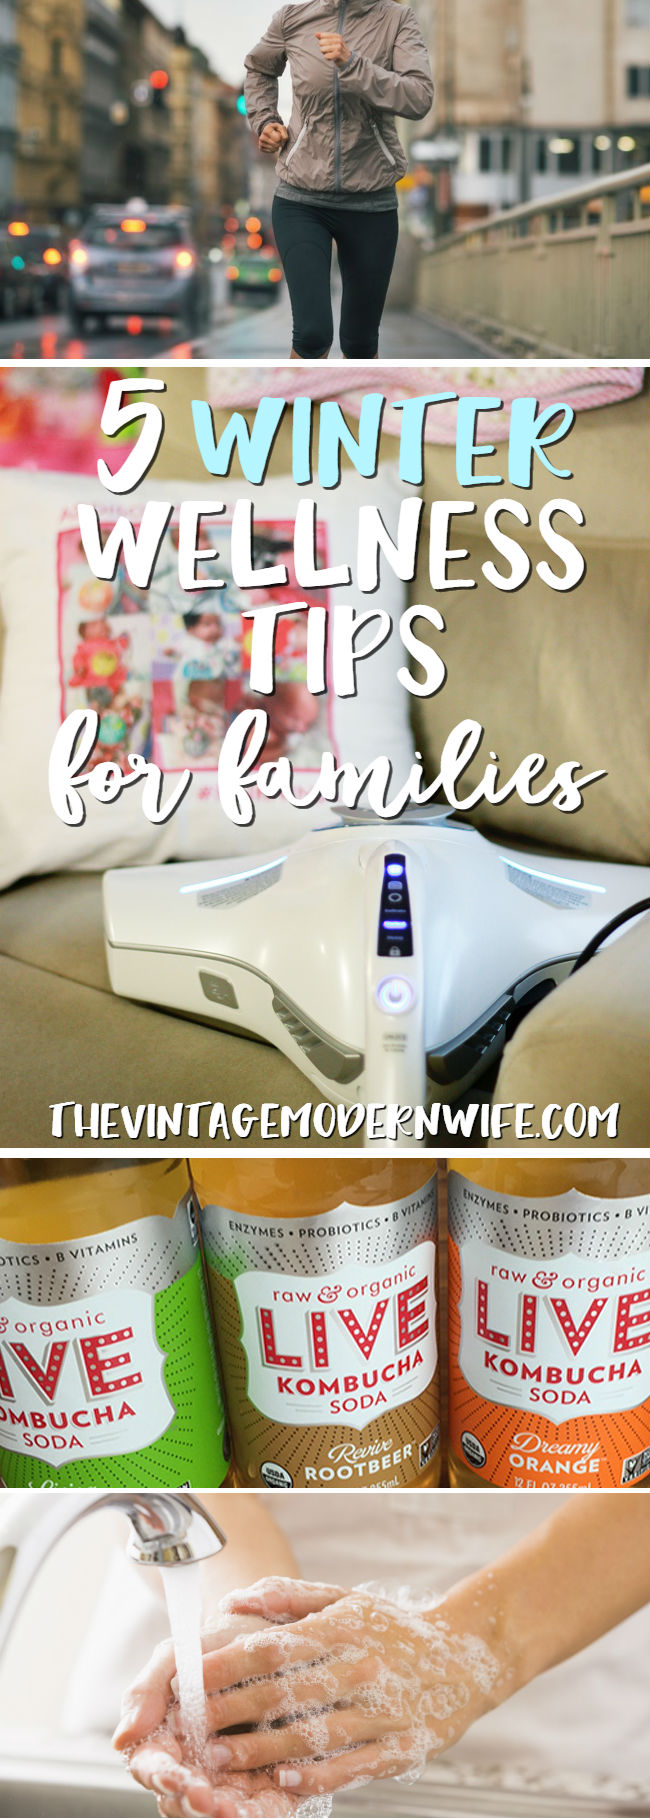 Trying to stay healthy this winter? Check out these 5 Winter Wellness Tips for Families. So many amazing ideas that I never would have thought of before!